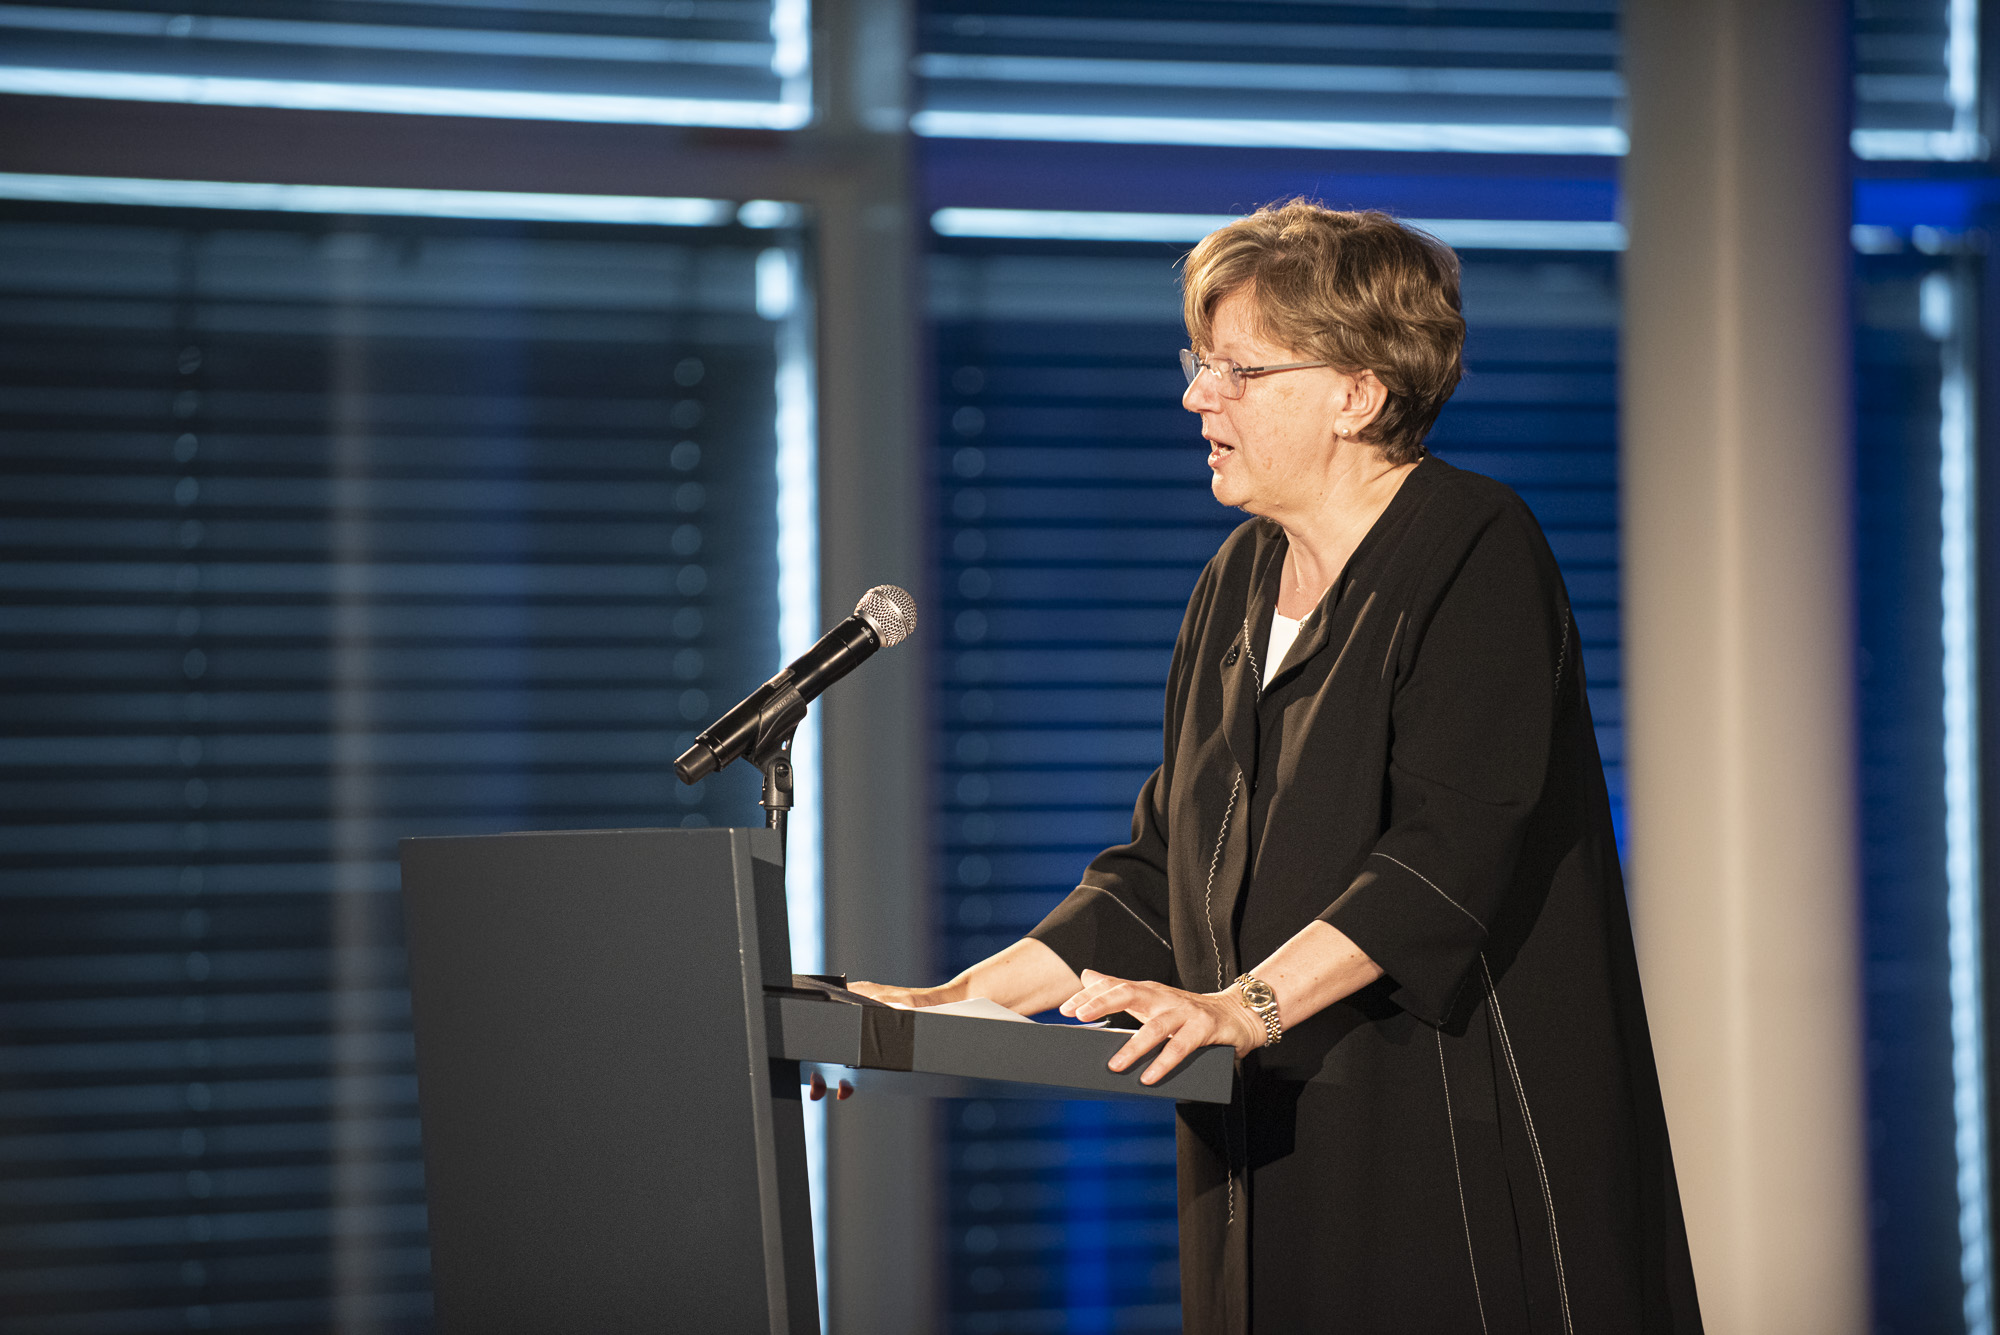 Swiss Design Awards ceremony, Director of the Federal Office of Culture, Isabelle Chassot